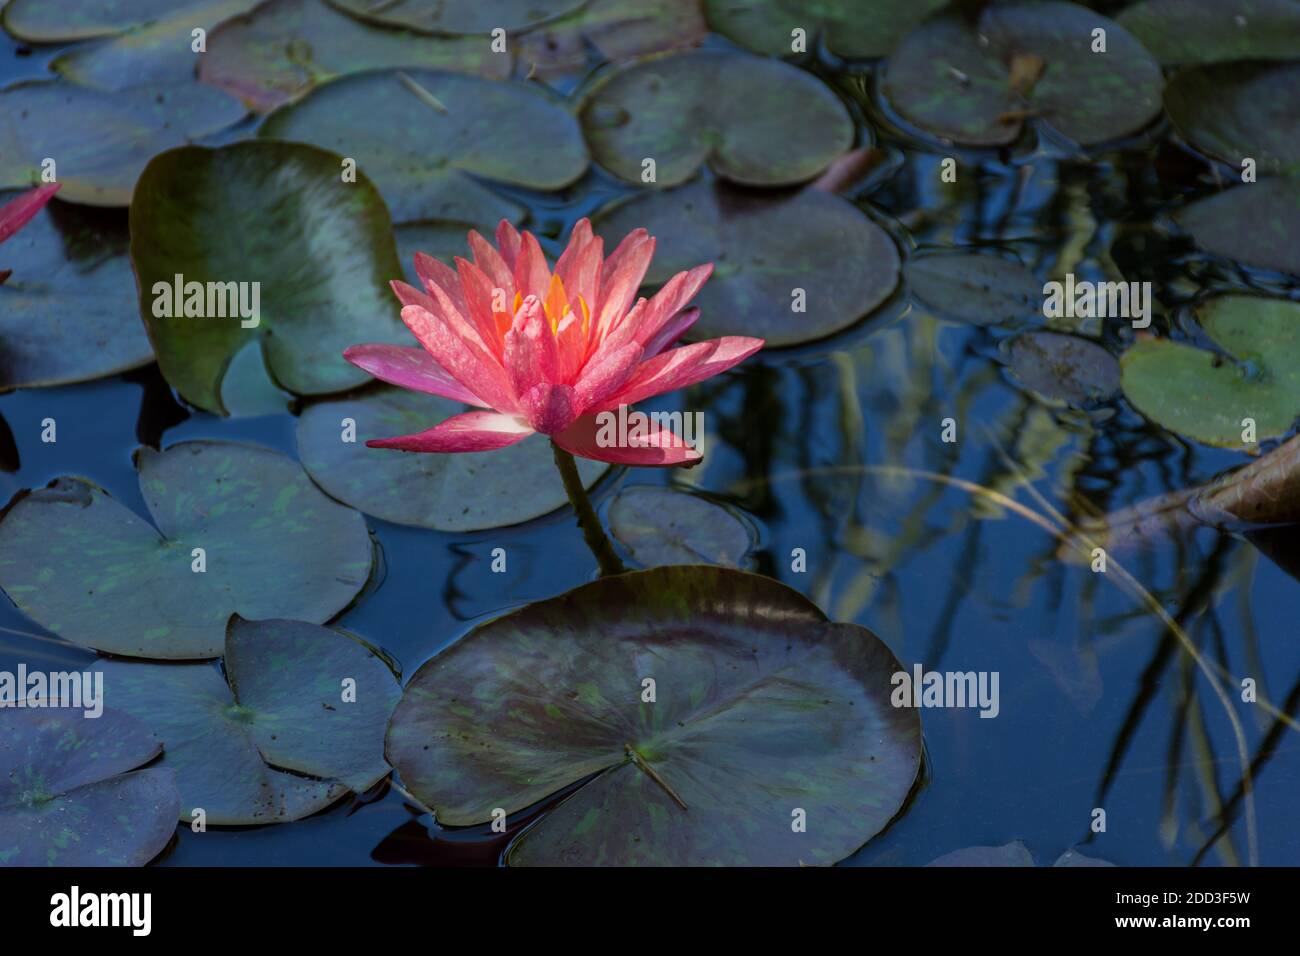 Pink lotuses bloom on an ornamental pond in the garden. Lotus flower Marliacea Rosea or pink water Lily lat. Nymphaea. Floral natural background. Brig Stock Photo